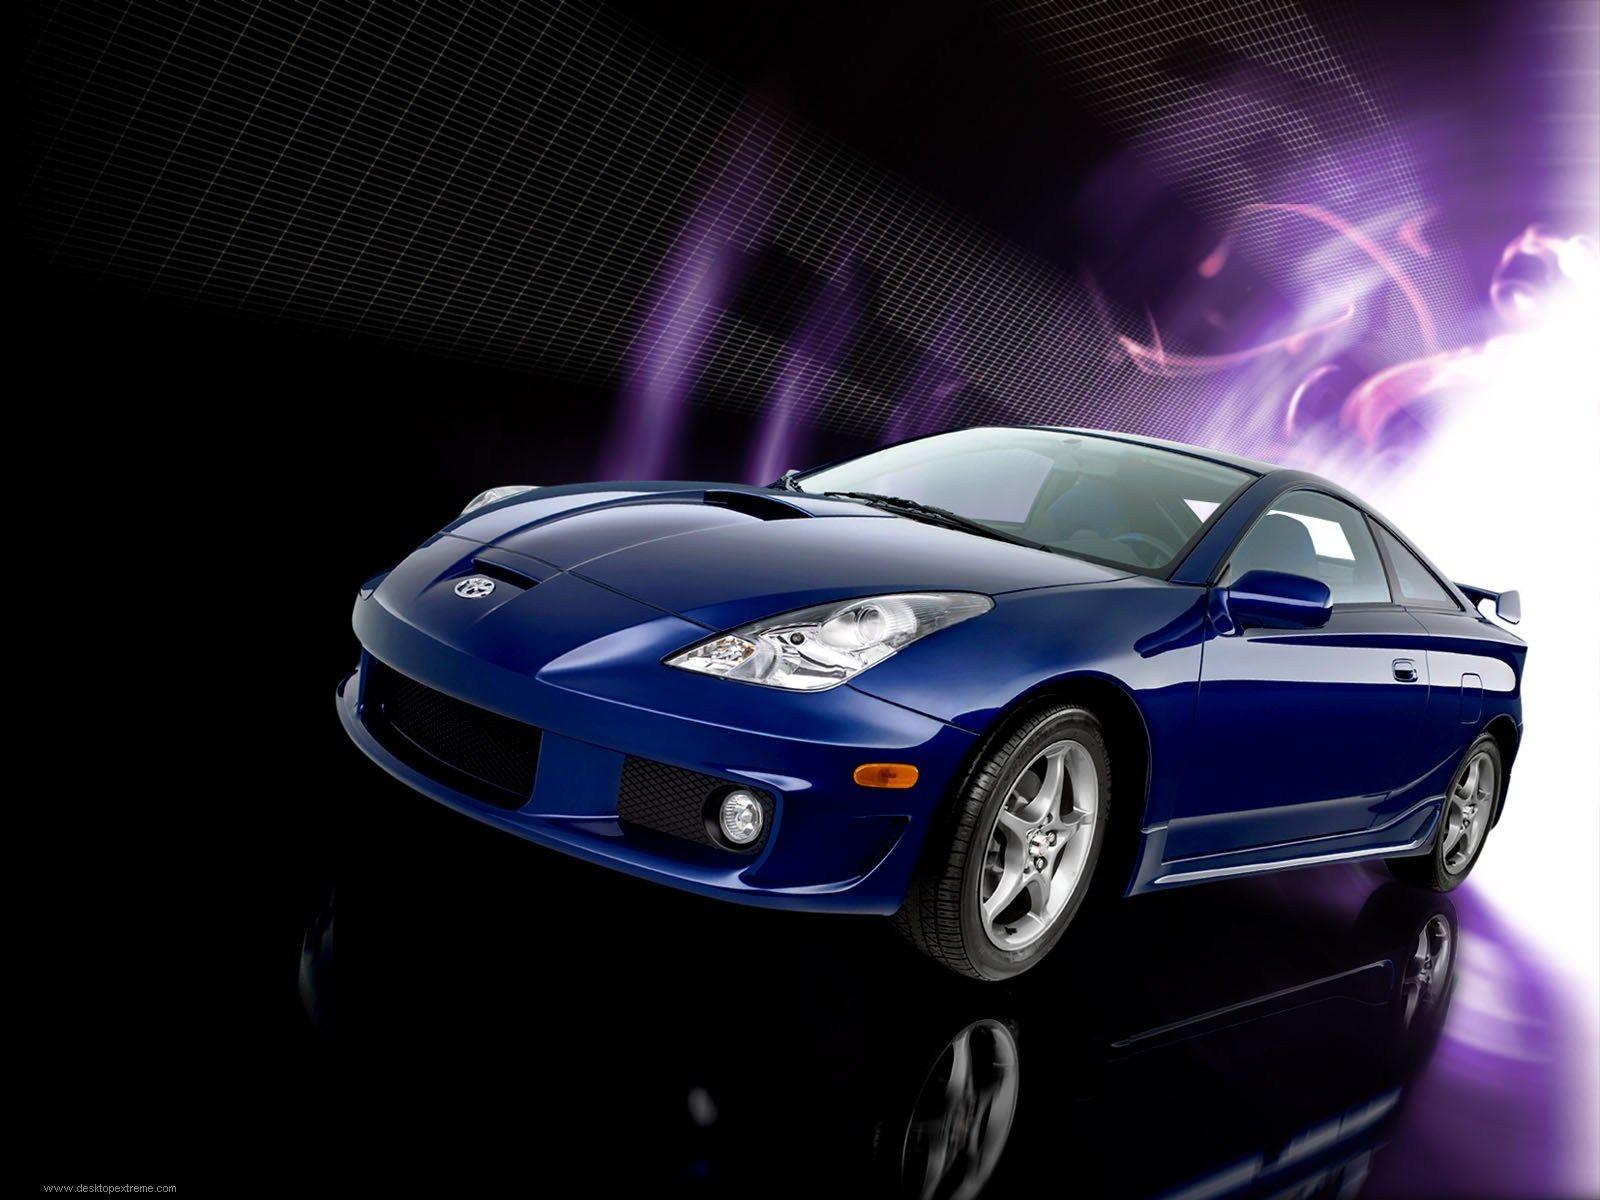 Awesome Toyota Celica Wallpaper HD. Toyota Celica